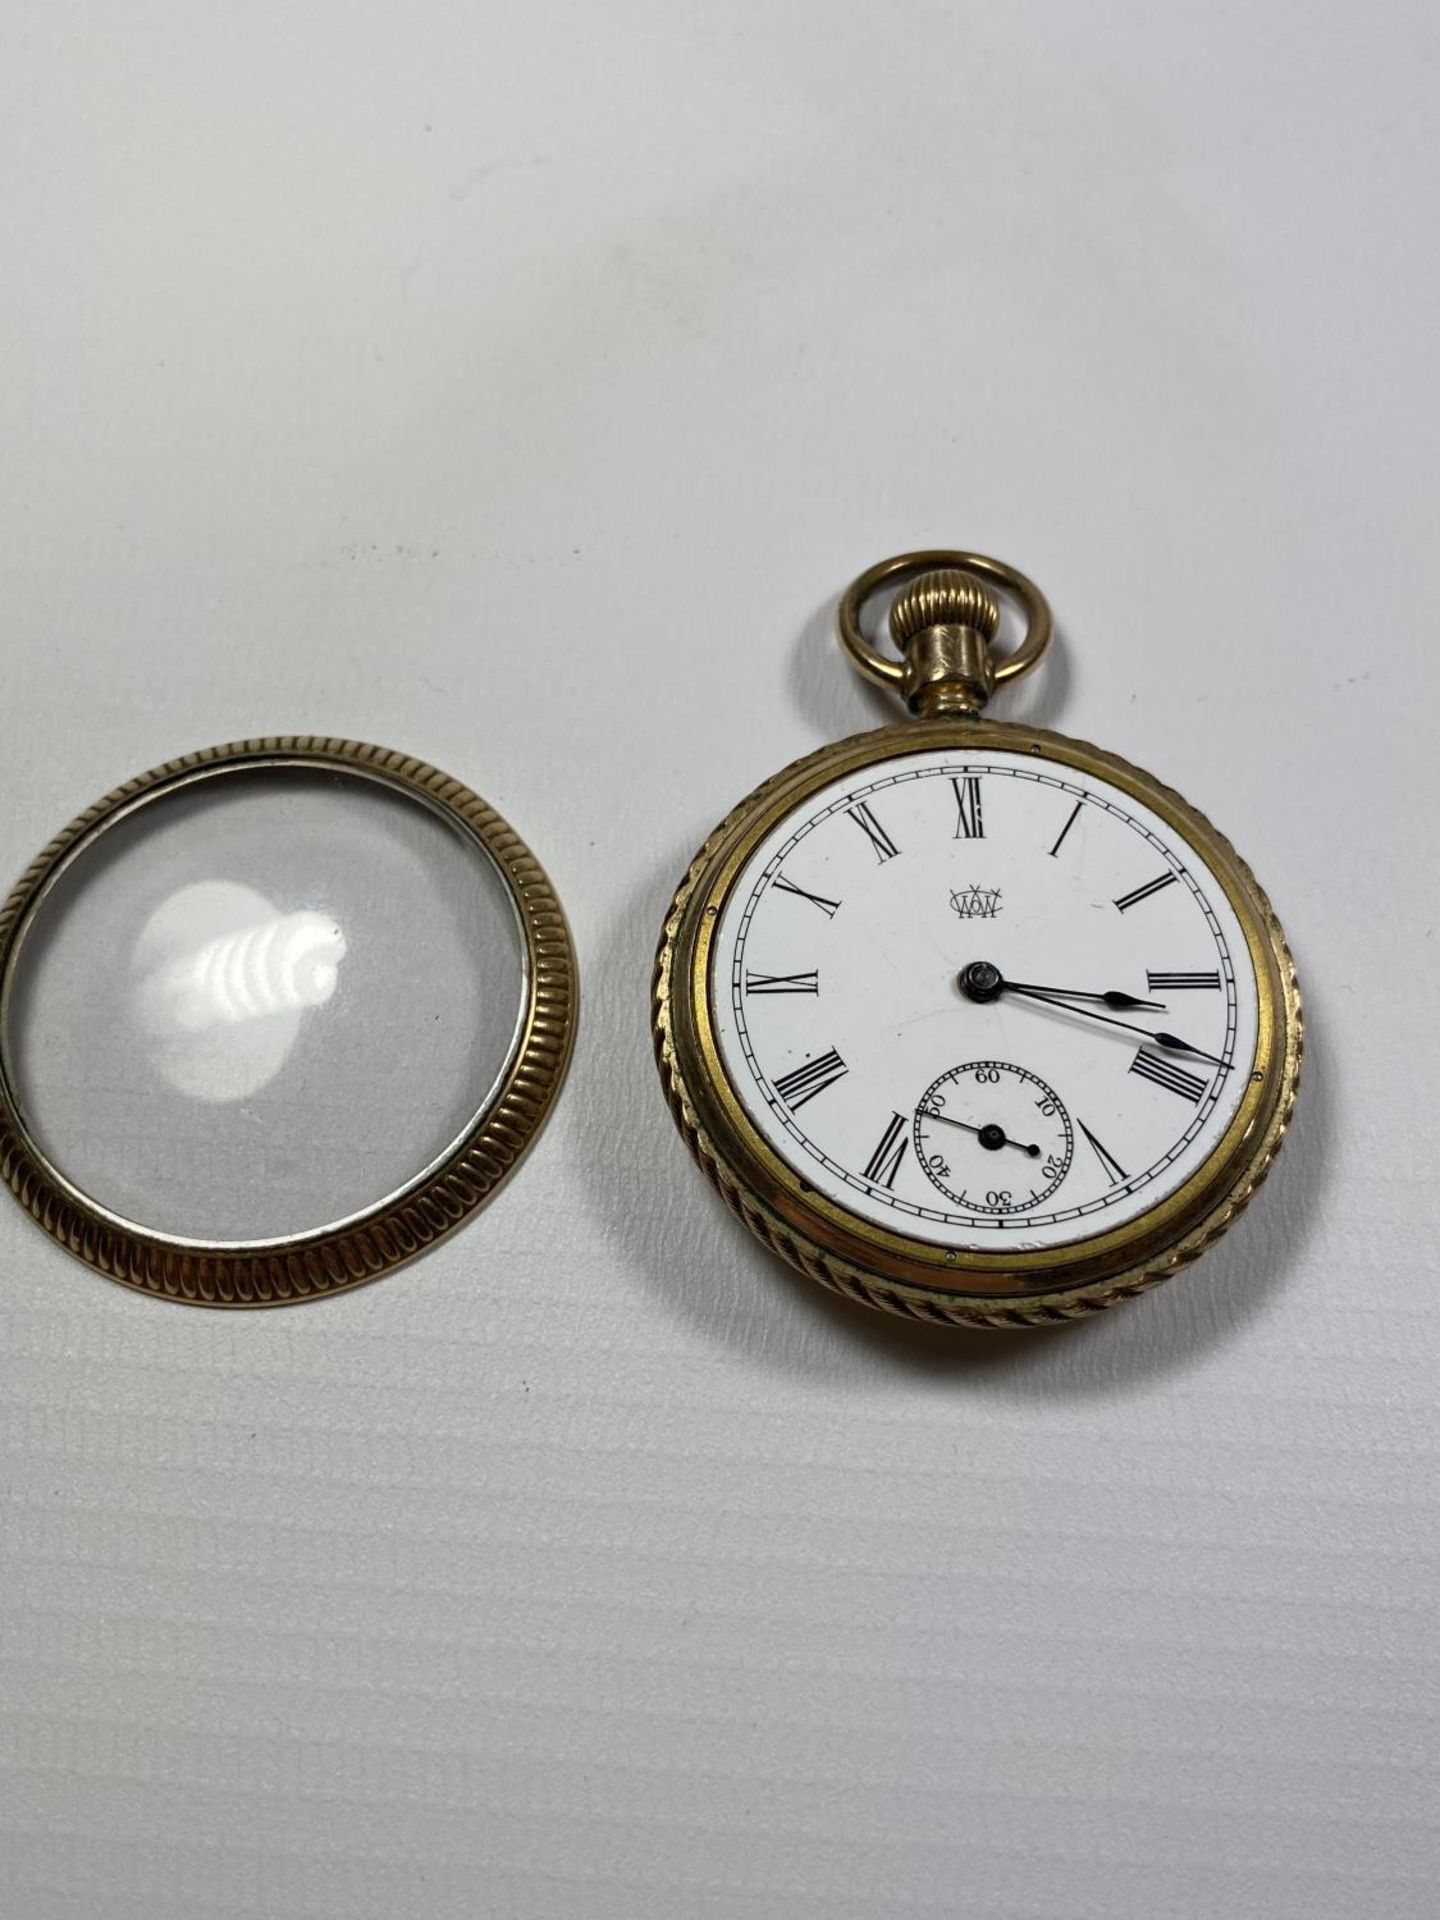 A VINTAGE GOLD PLATED U.S.A OPEN FACED POCKET WATCH, SIGNED TO MOVEMENT, NUMBERED 802611 - Image 2 of 5